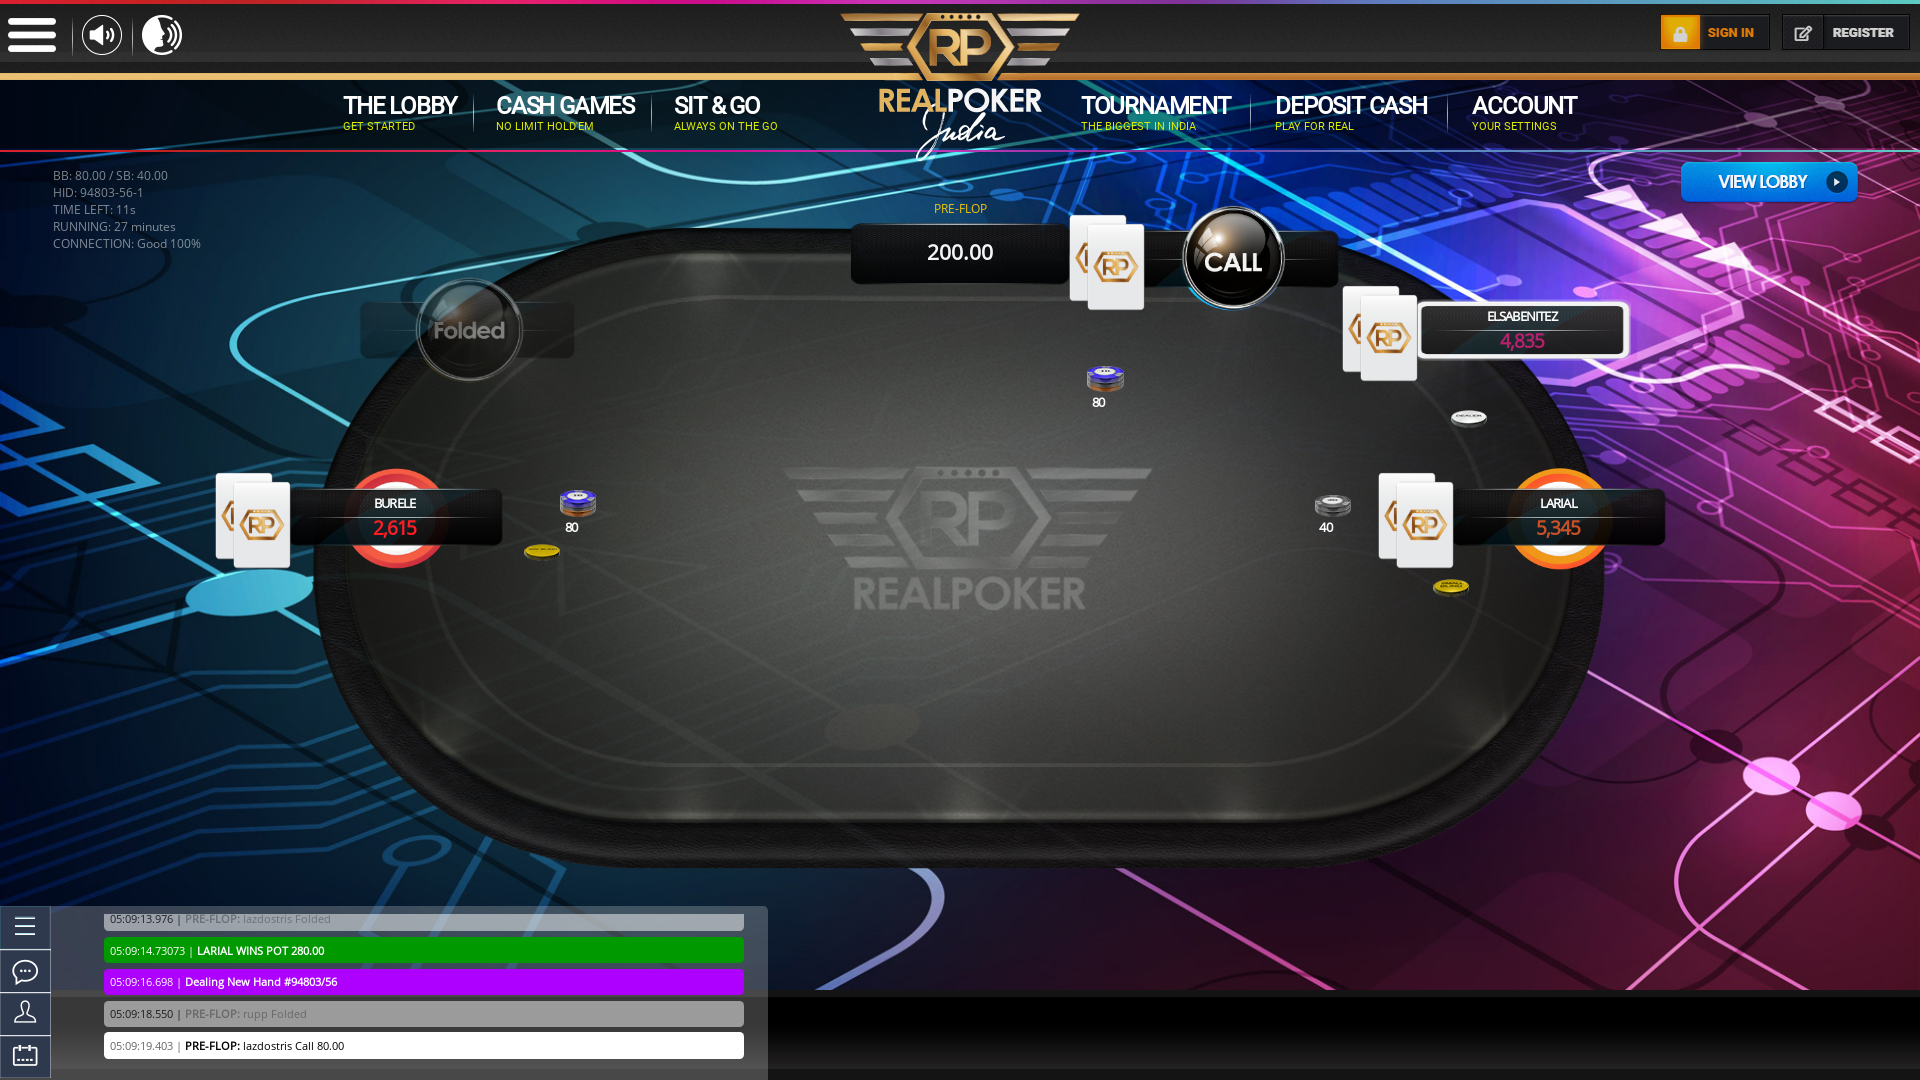 Real poker 10 player table in the 27th minute